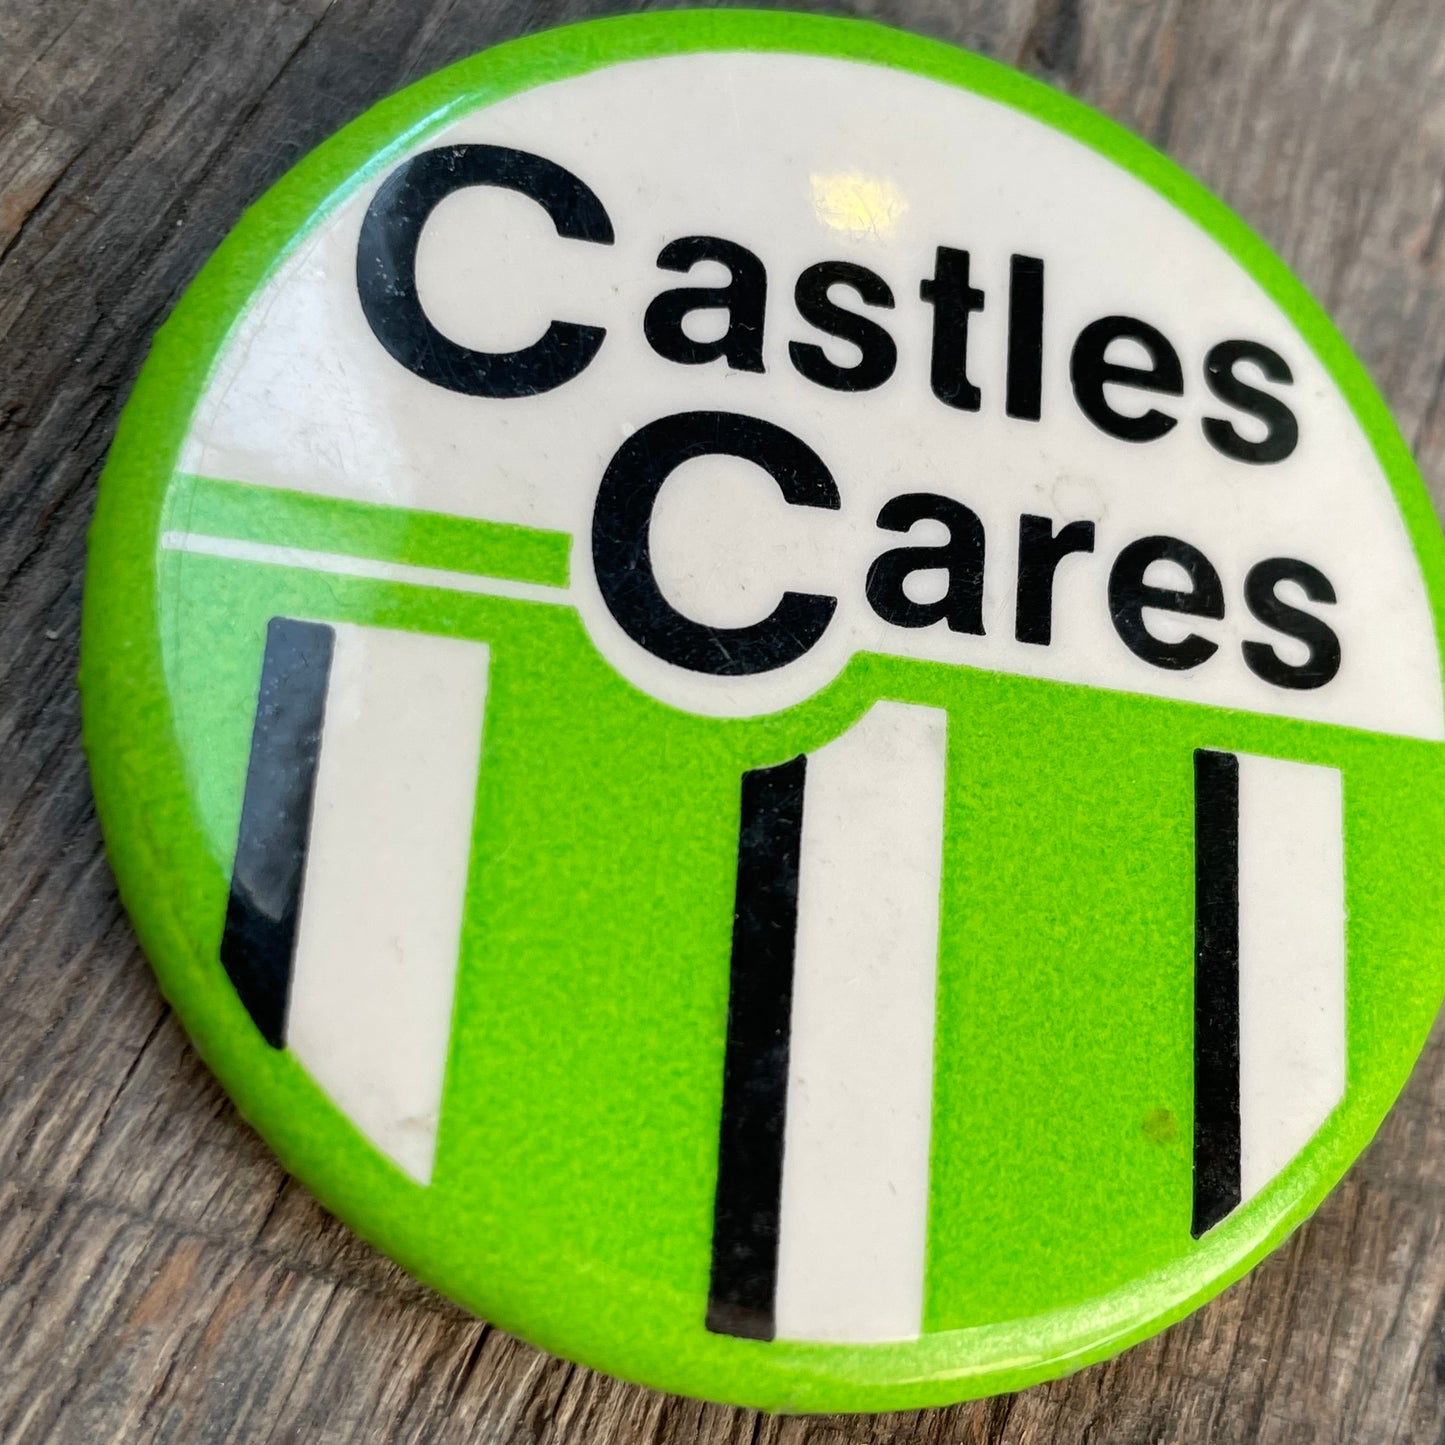 【USA vintage】缶バッジ　Castle Cares